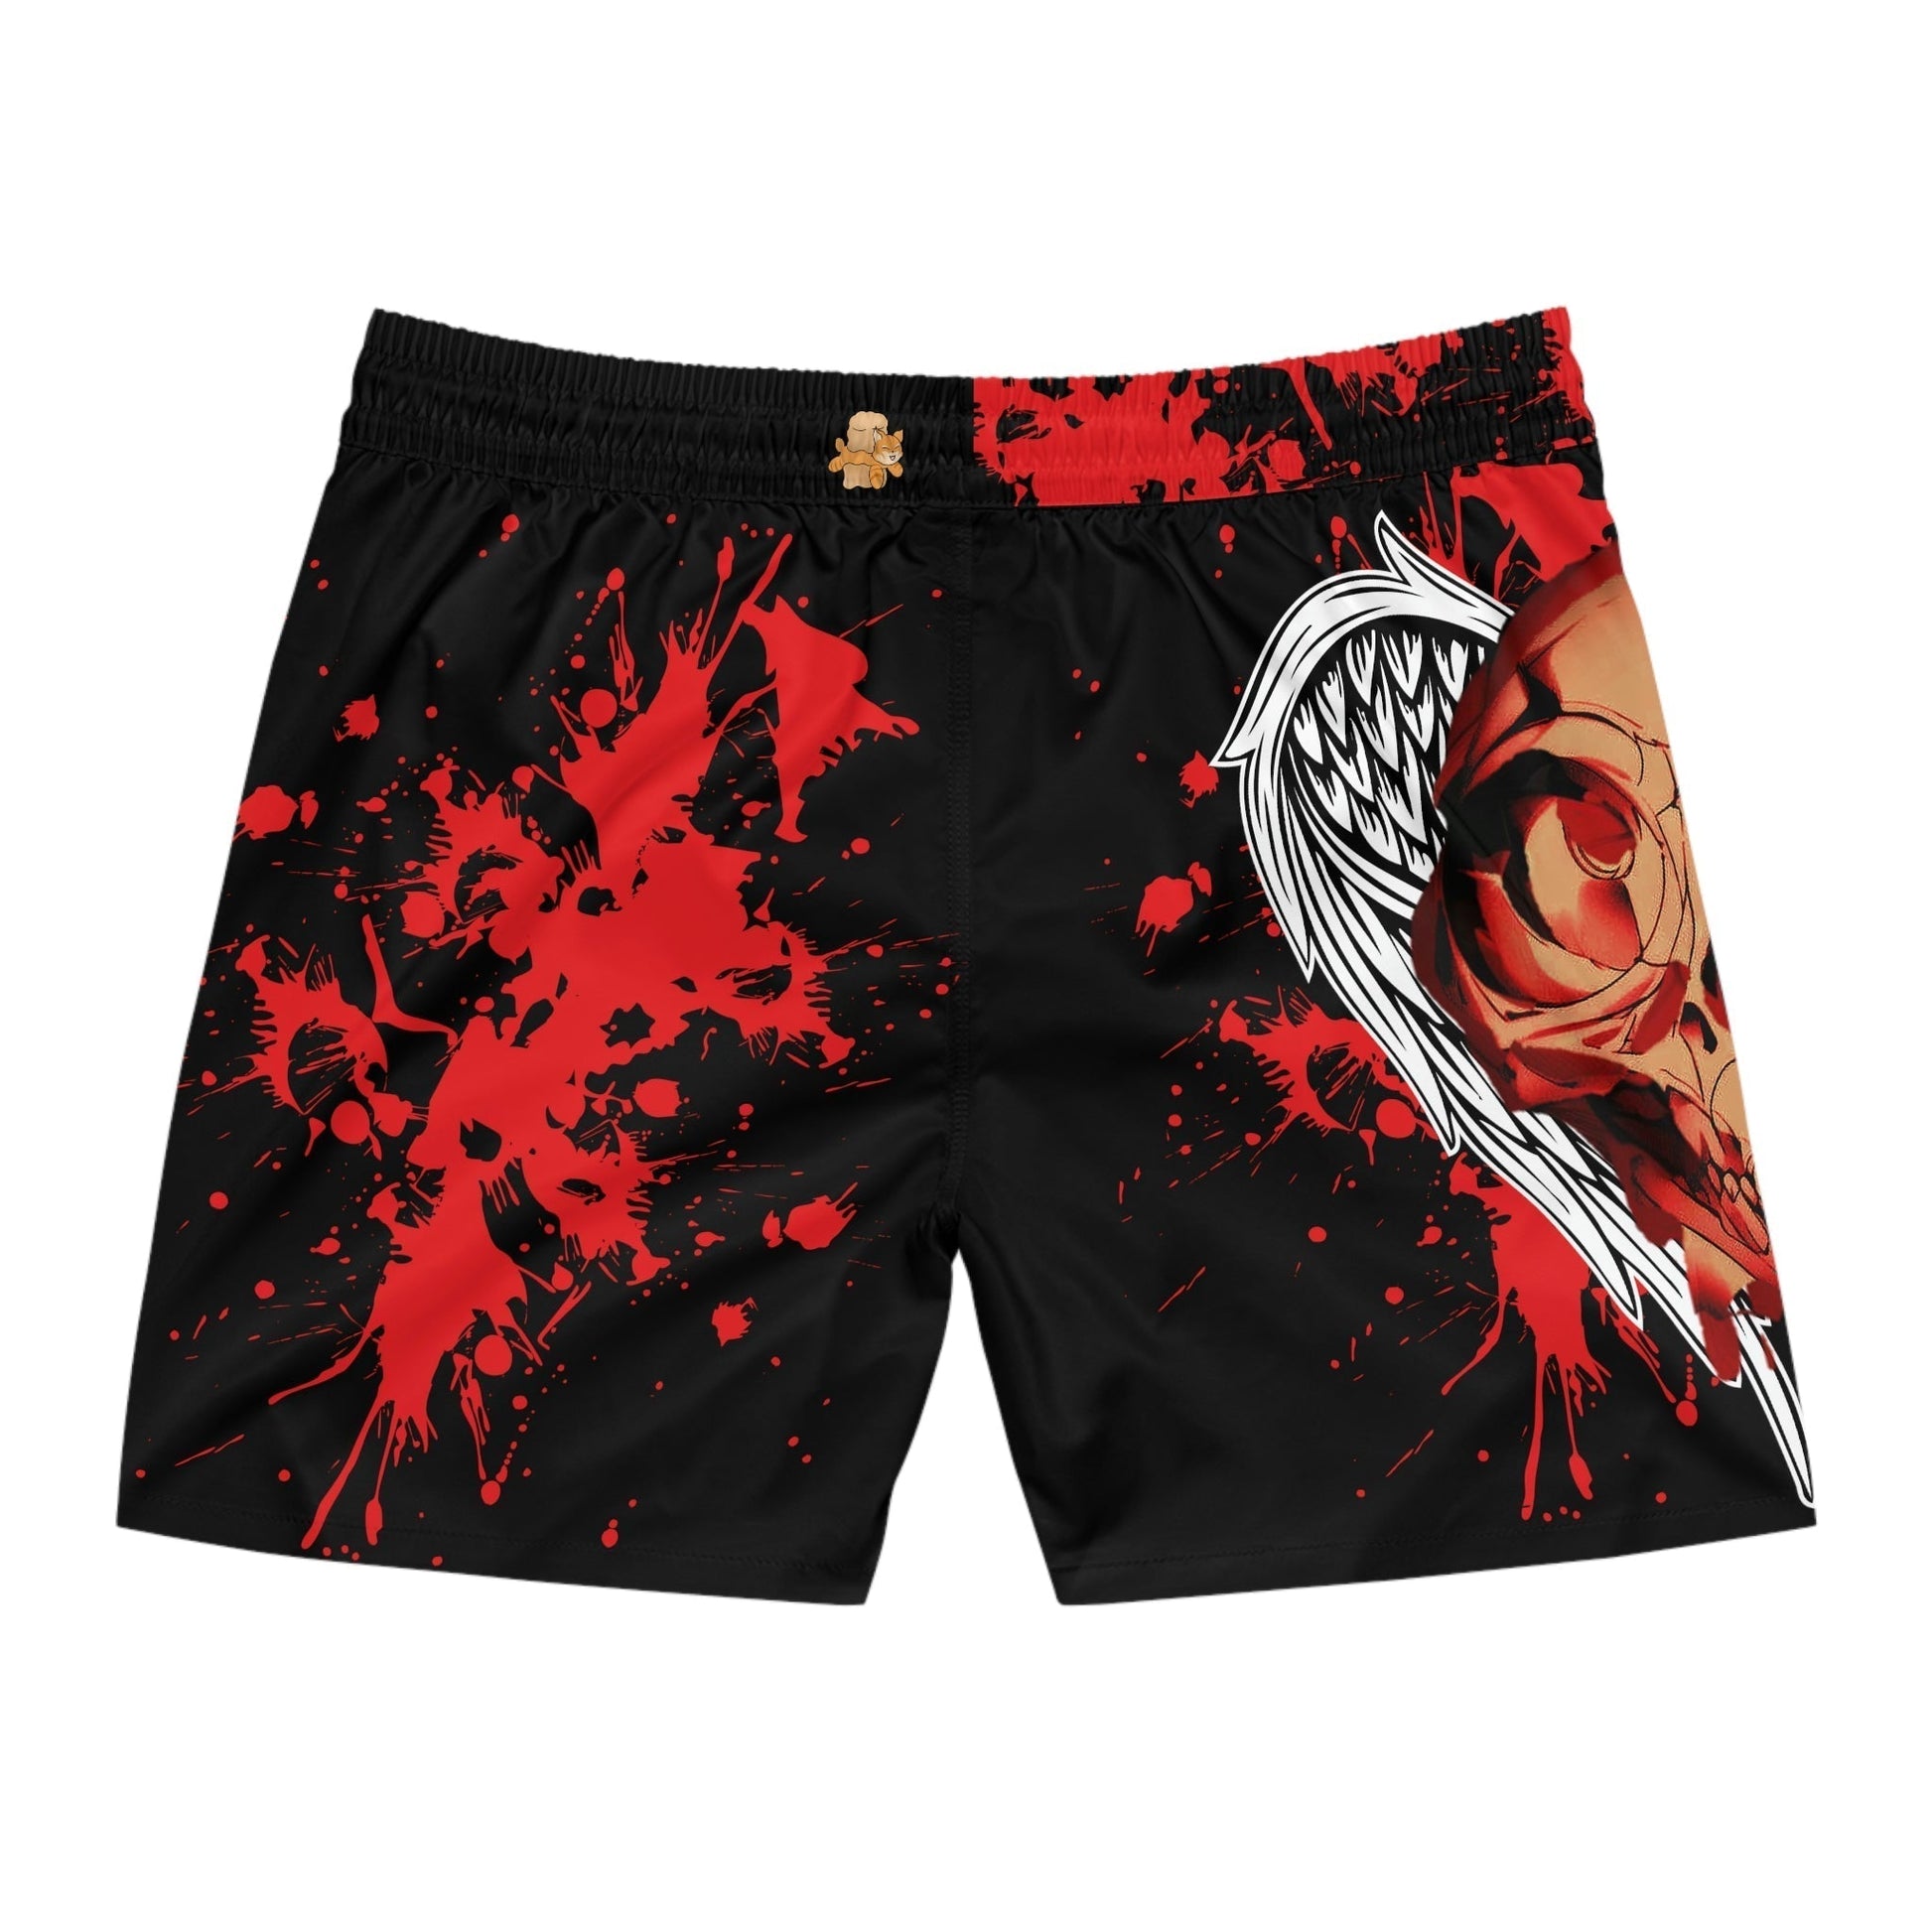 Stand out  with the  Men's Mid-Length Swim Shorts  available at Hey Nugget. Grab yours today!